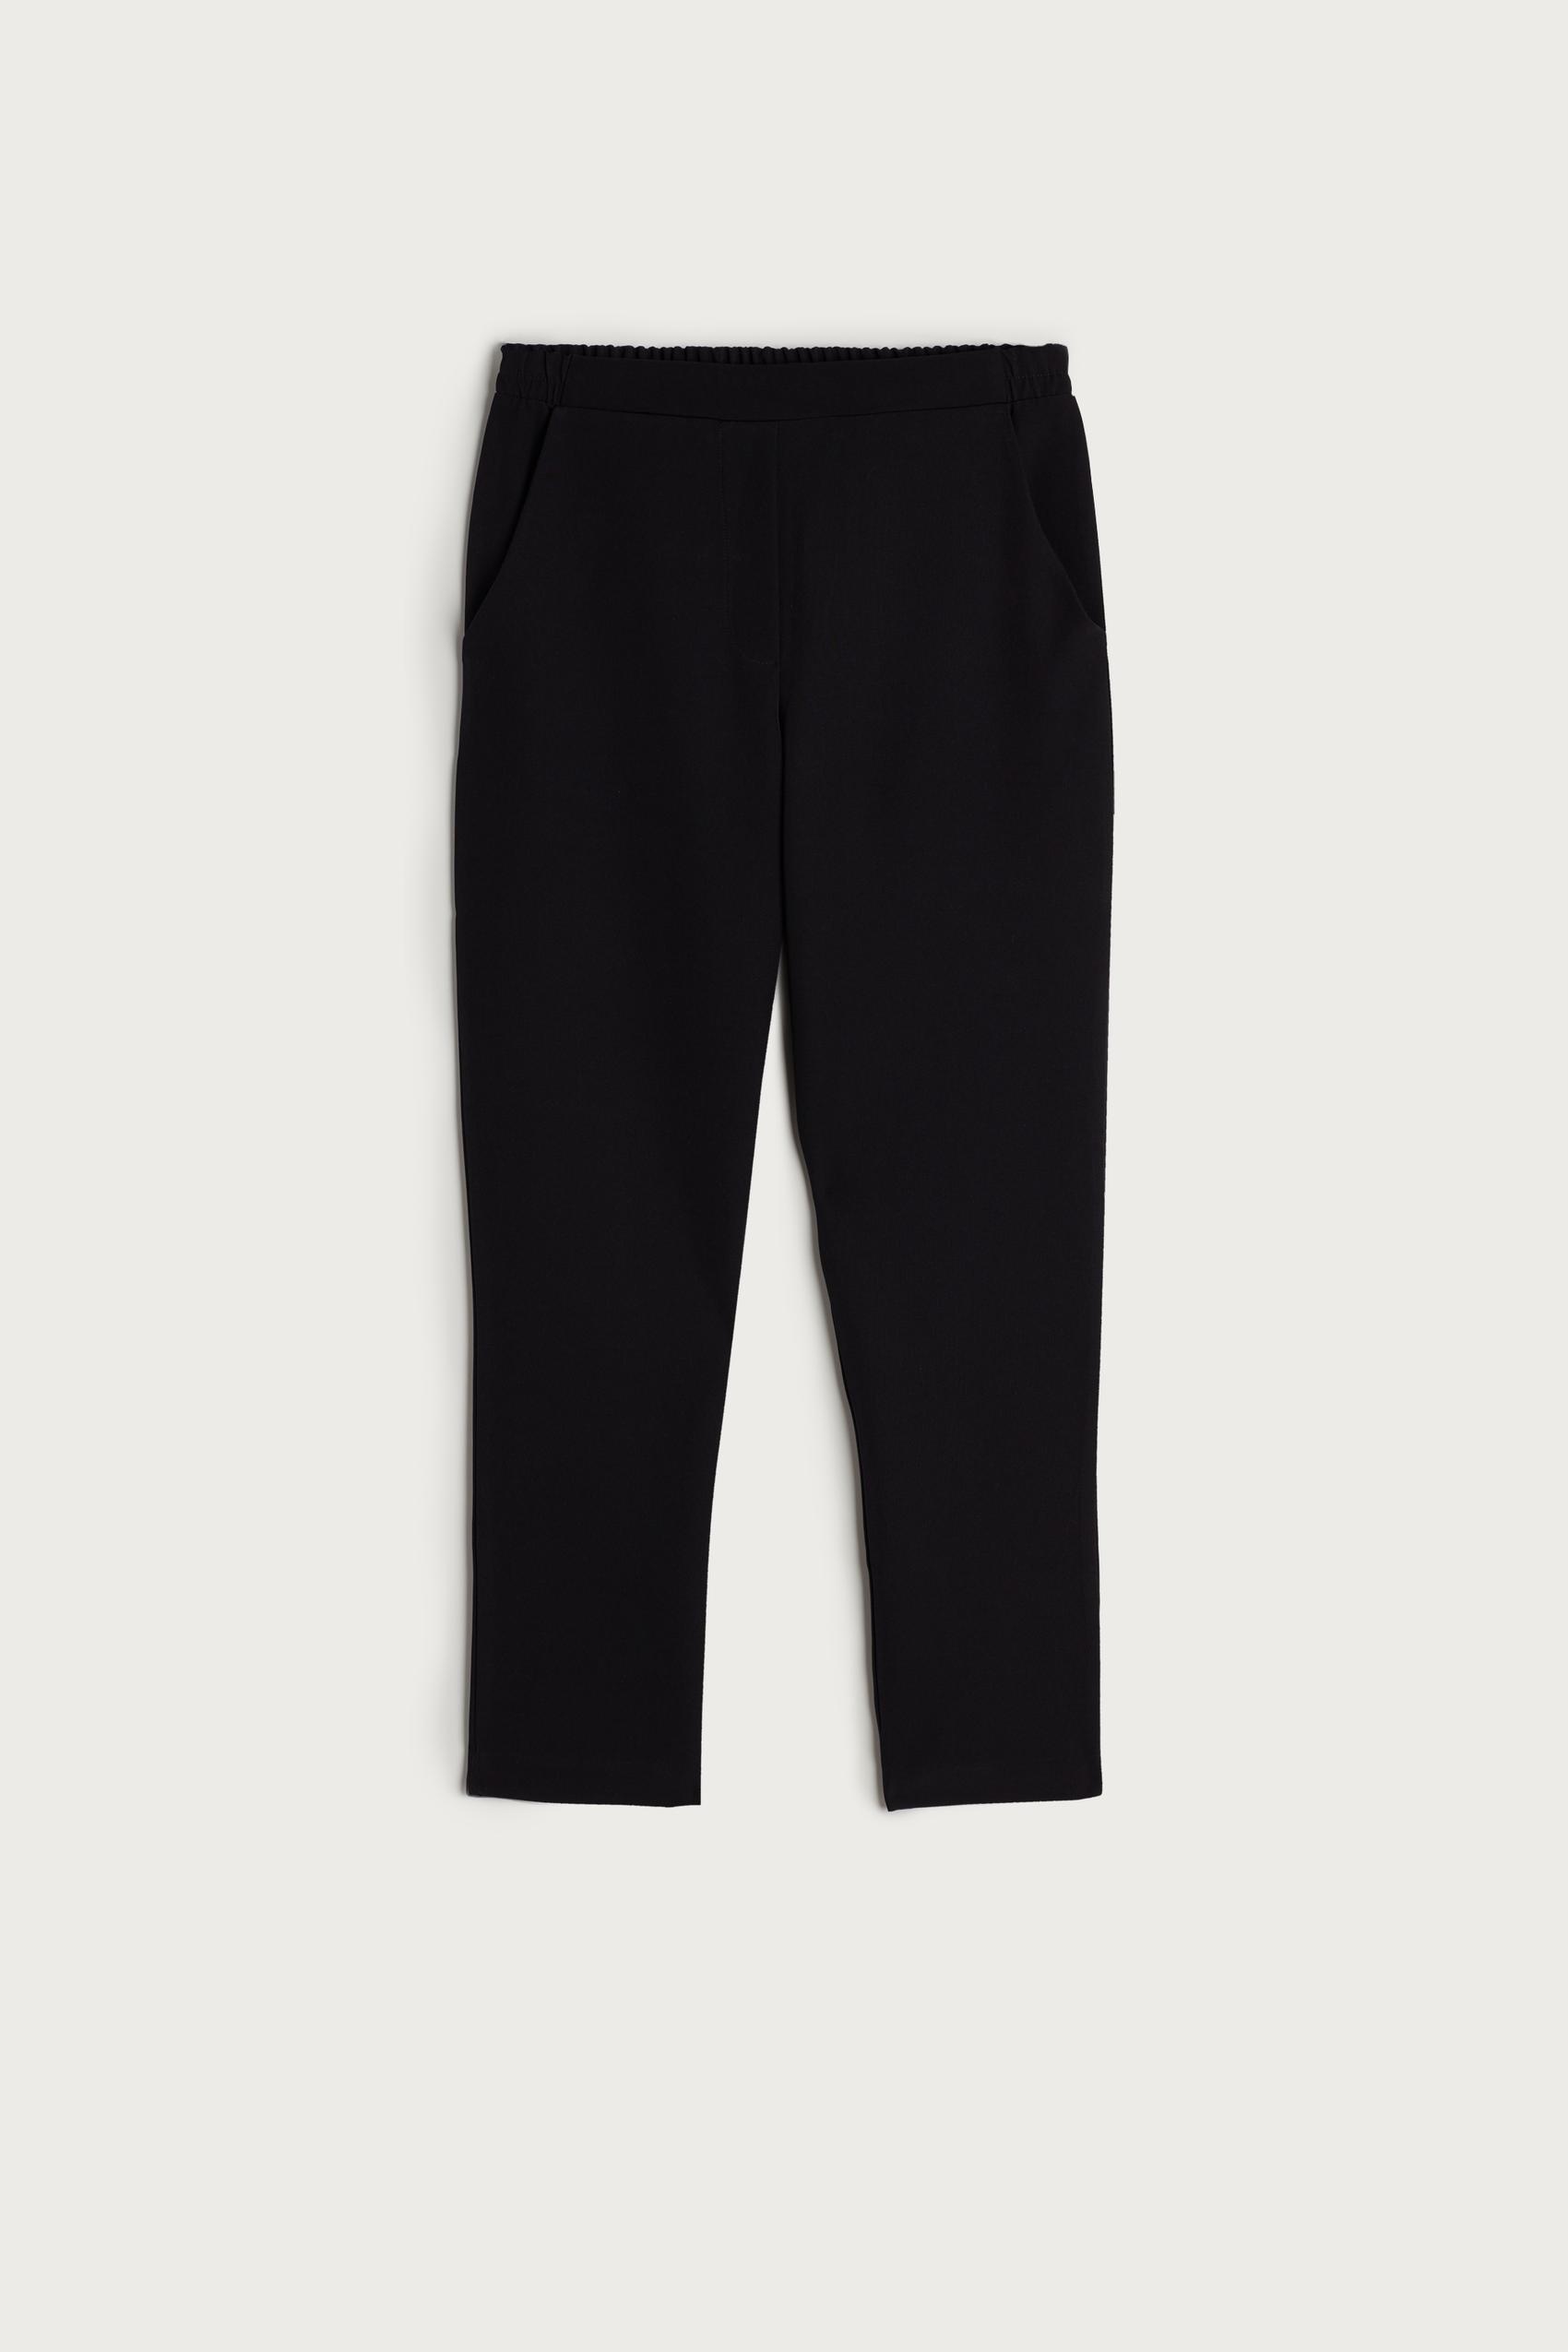 Intimissimi - Black Trousers With Pockets